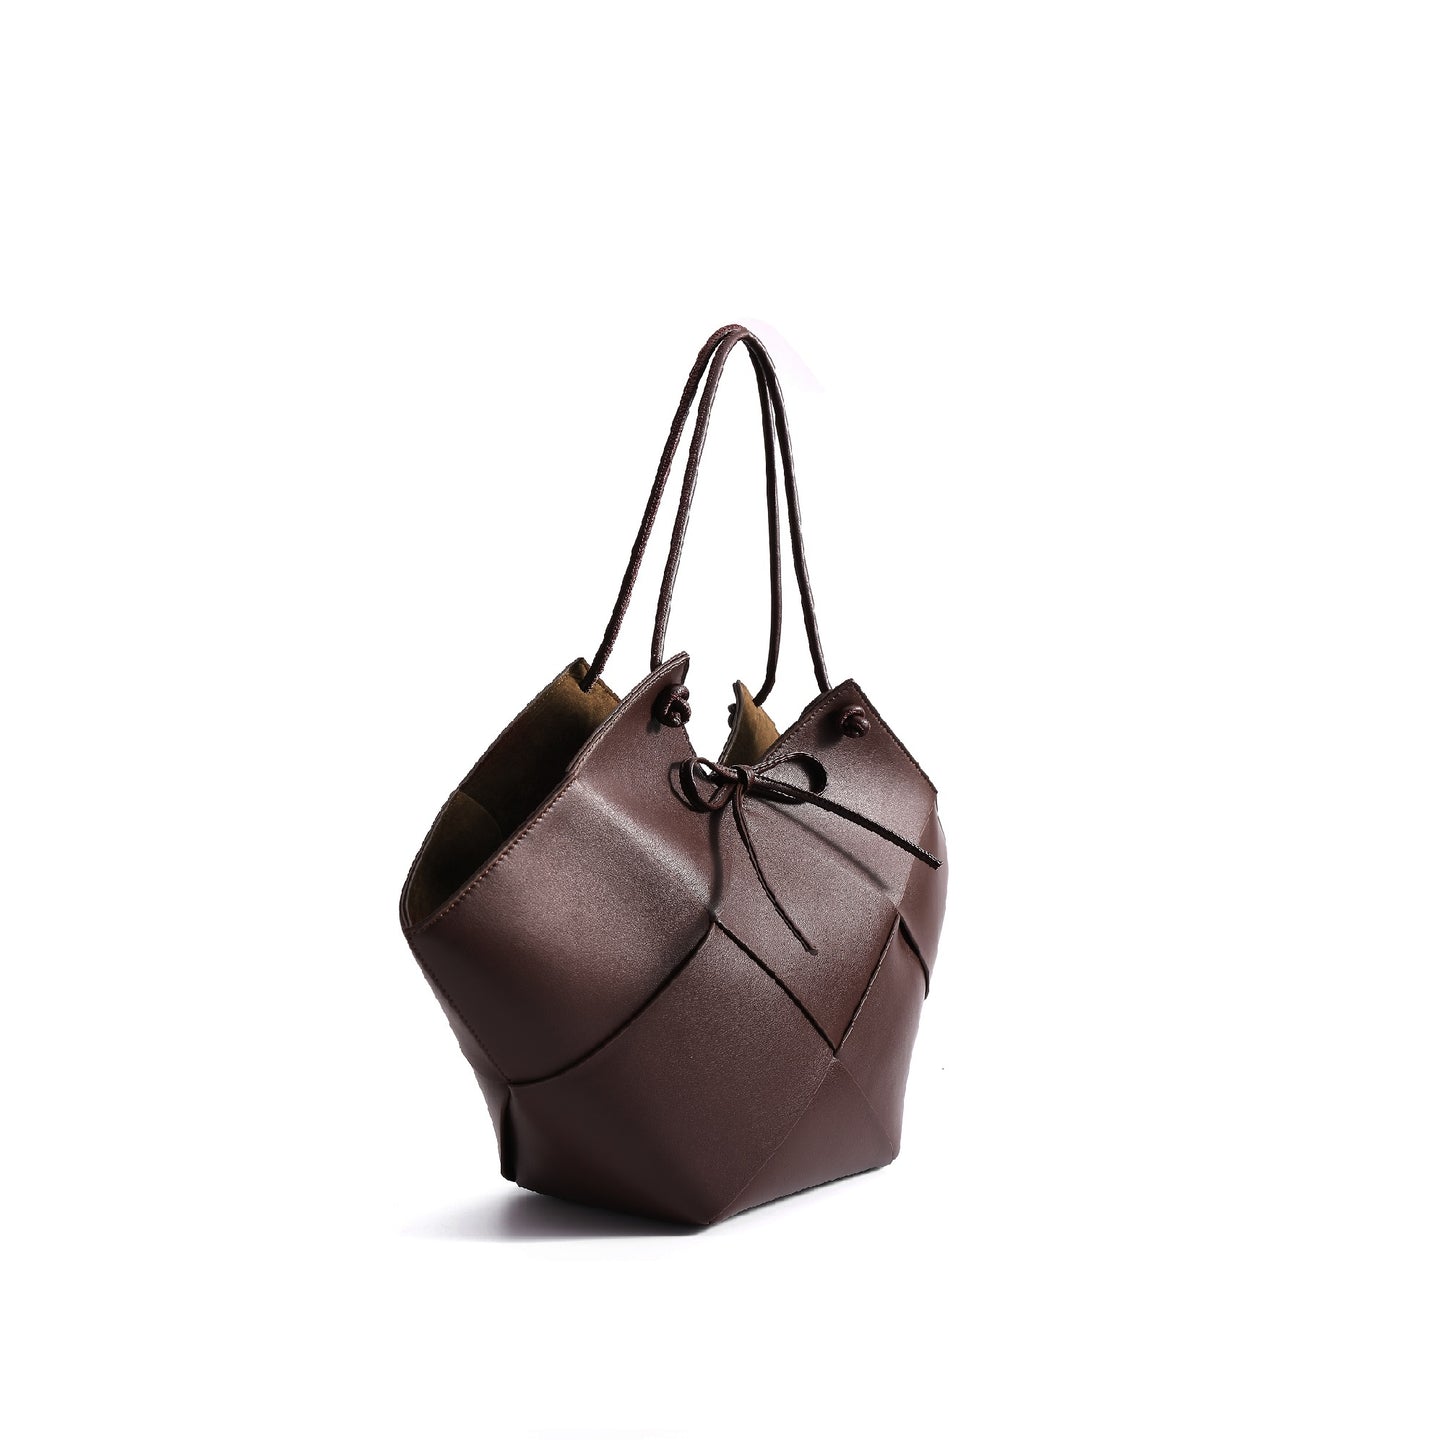 Taylor Contexture Leather Bag, Chocolate